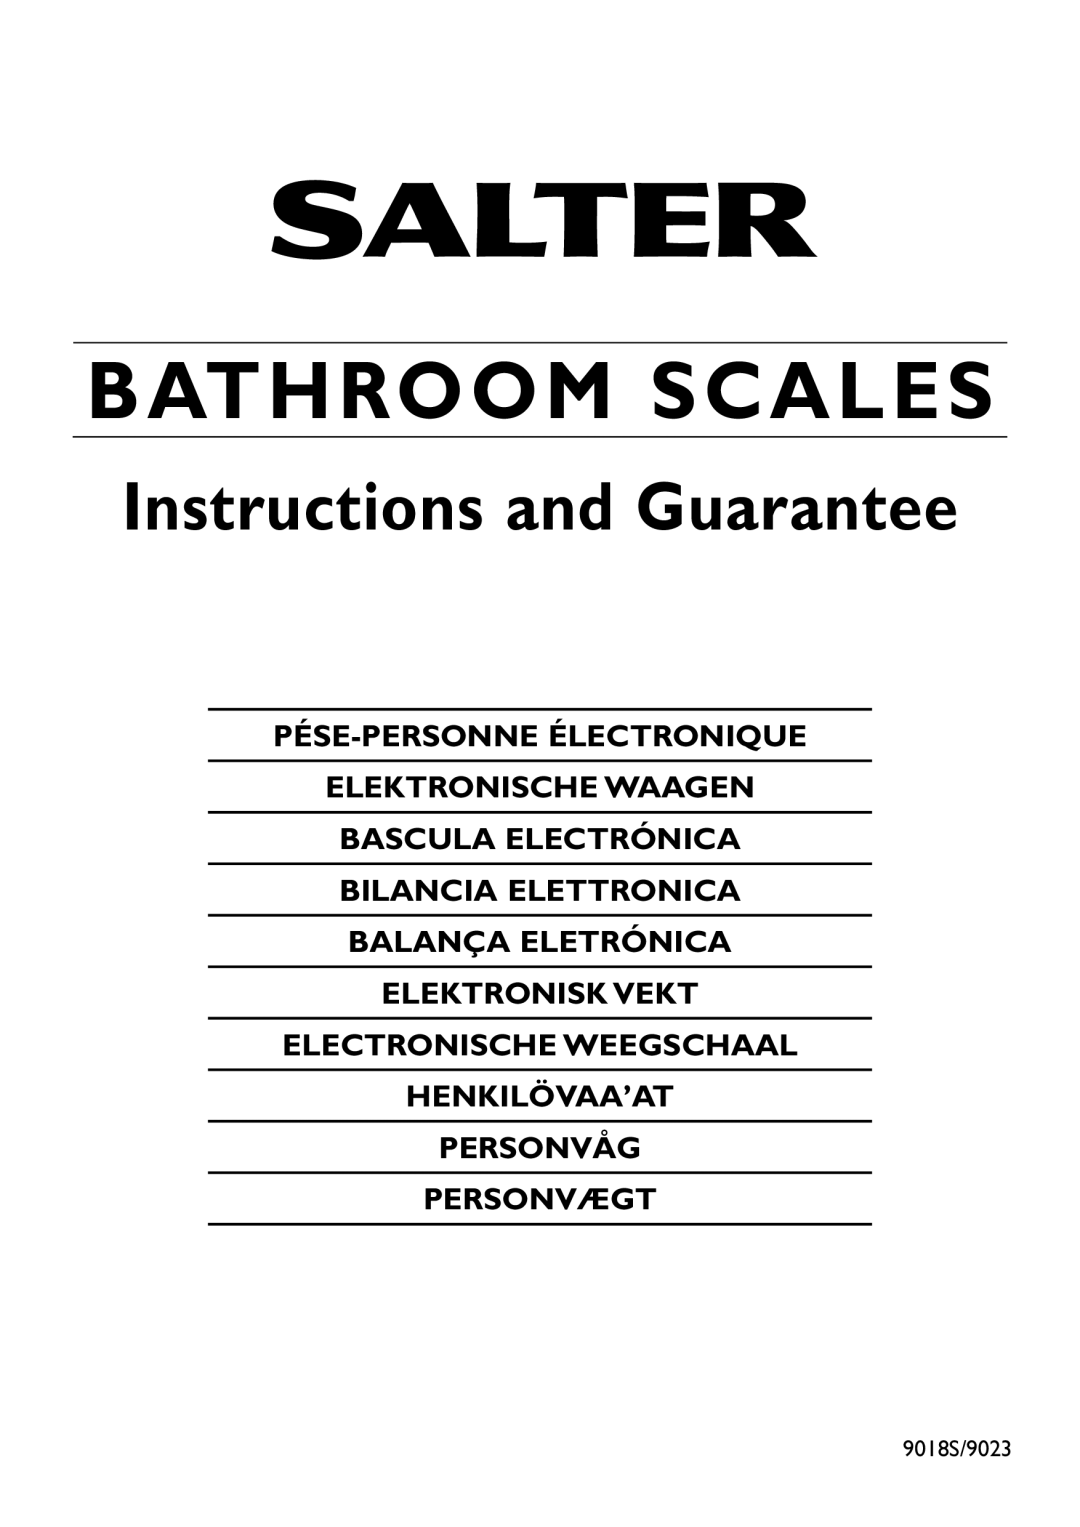 Salter Housewares 9018s manual Bathroom Scales, Instructions and Guarantee, 9018S/9023 